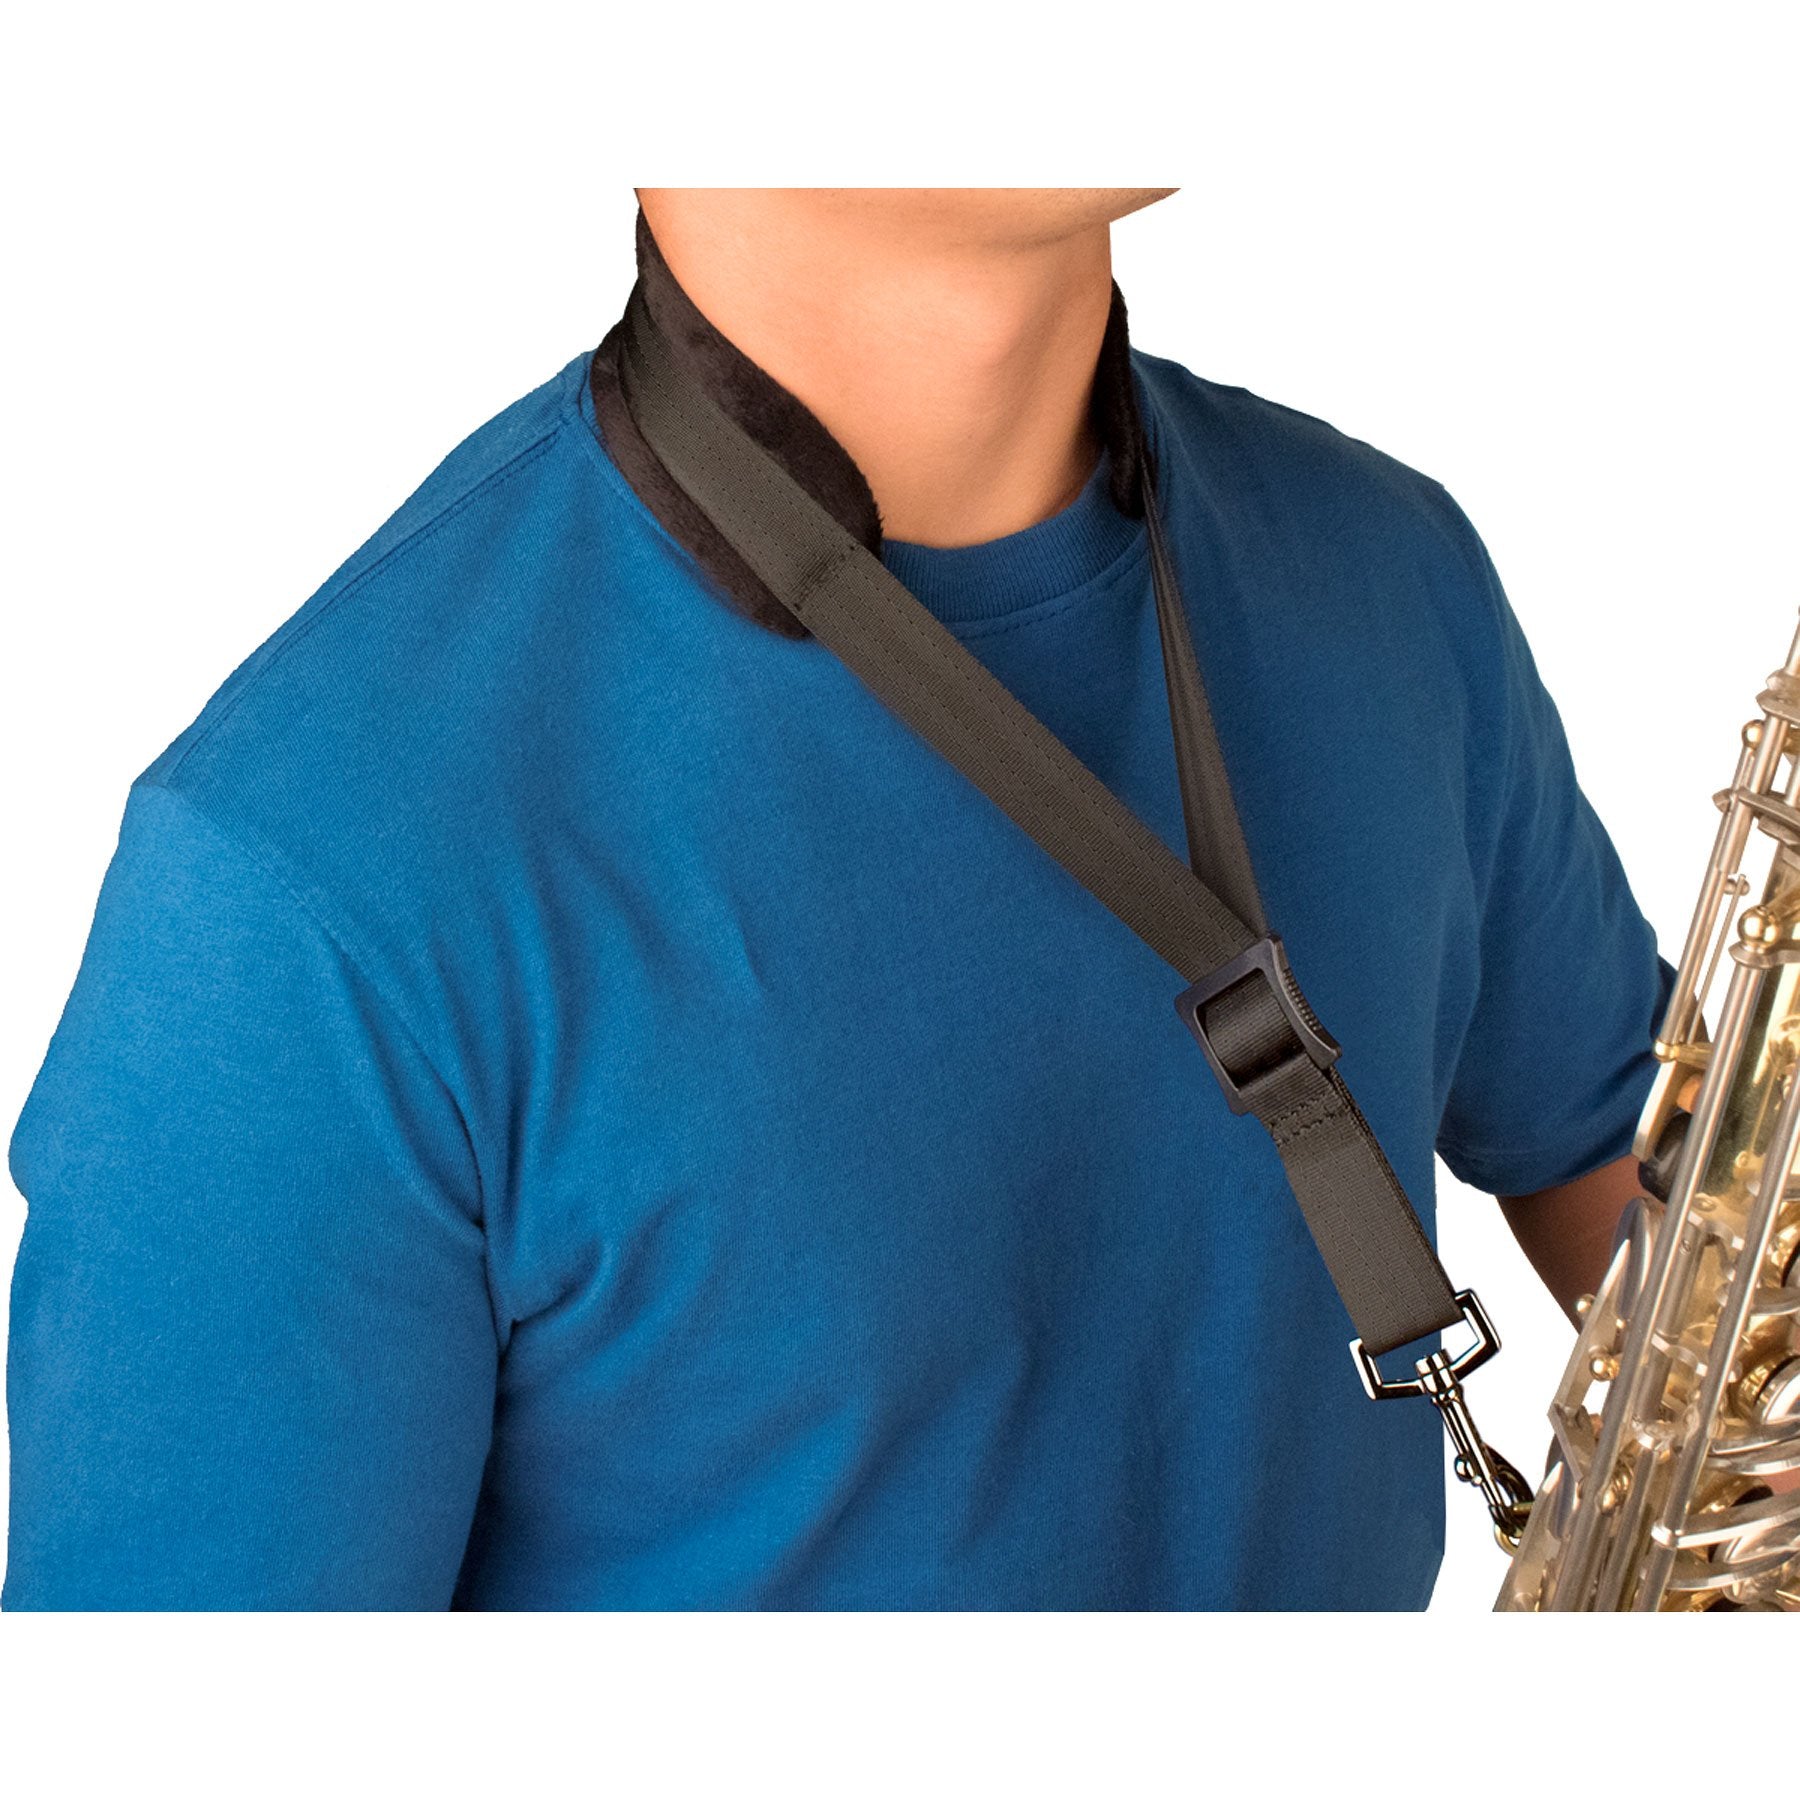 Protec - Saxophone Neck Strap Featuring Velour Neck Pad and Metal Snap-Accessories-Protec-Music Elements